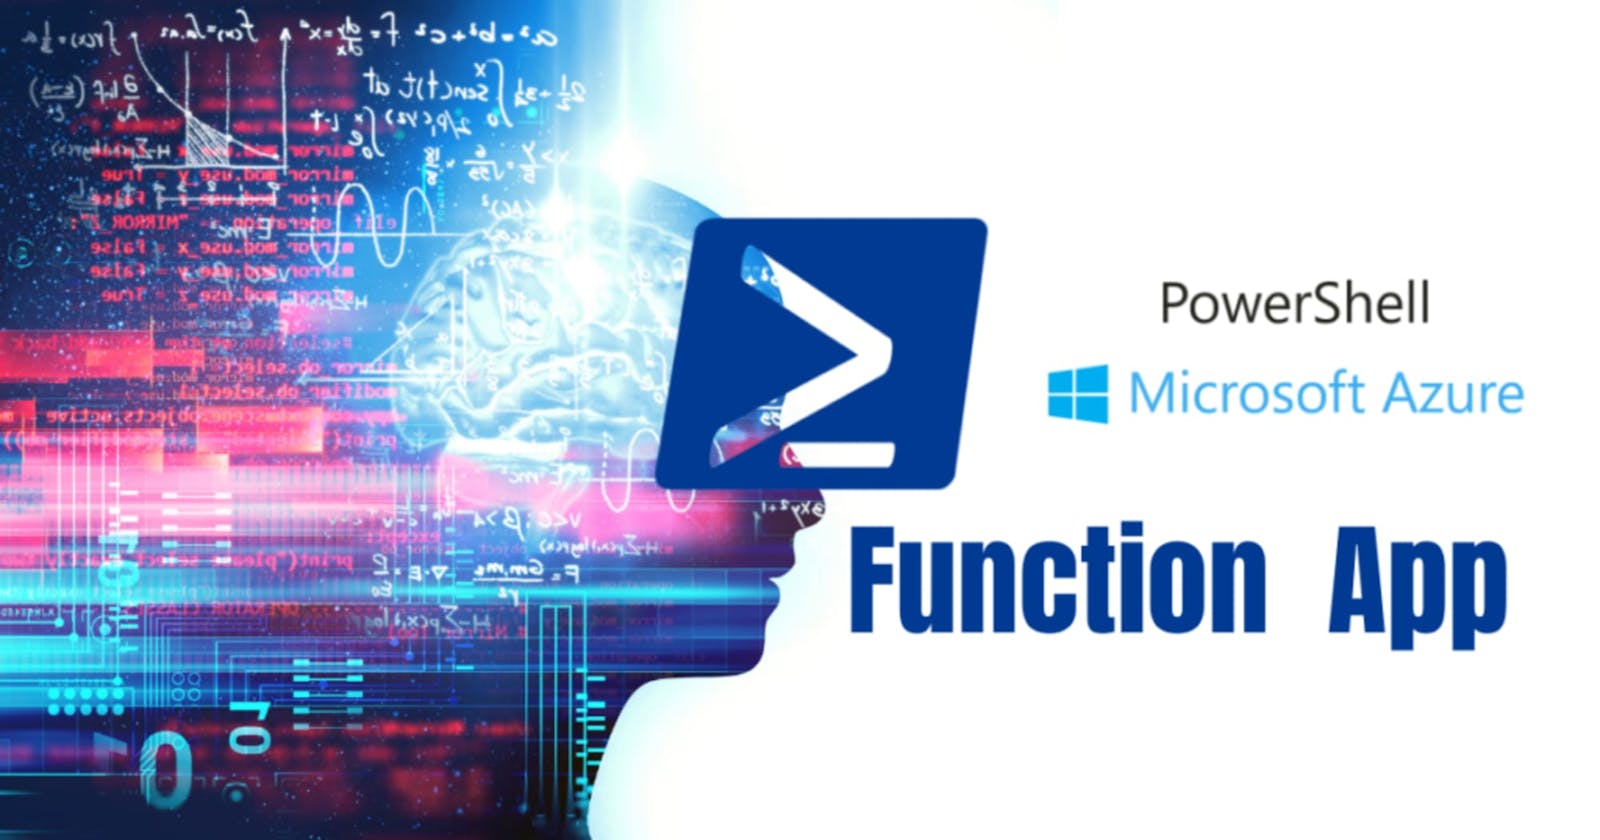 Creating Your First Azure PowerShell Function App